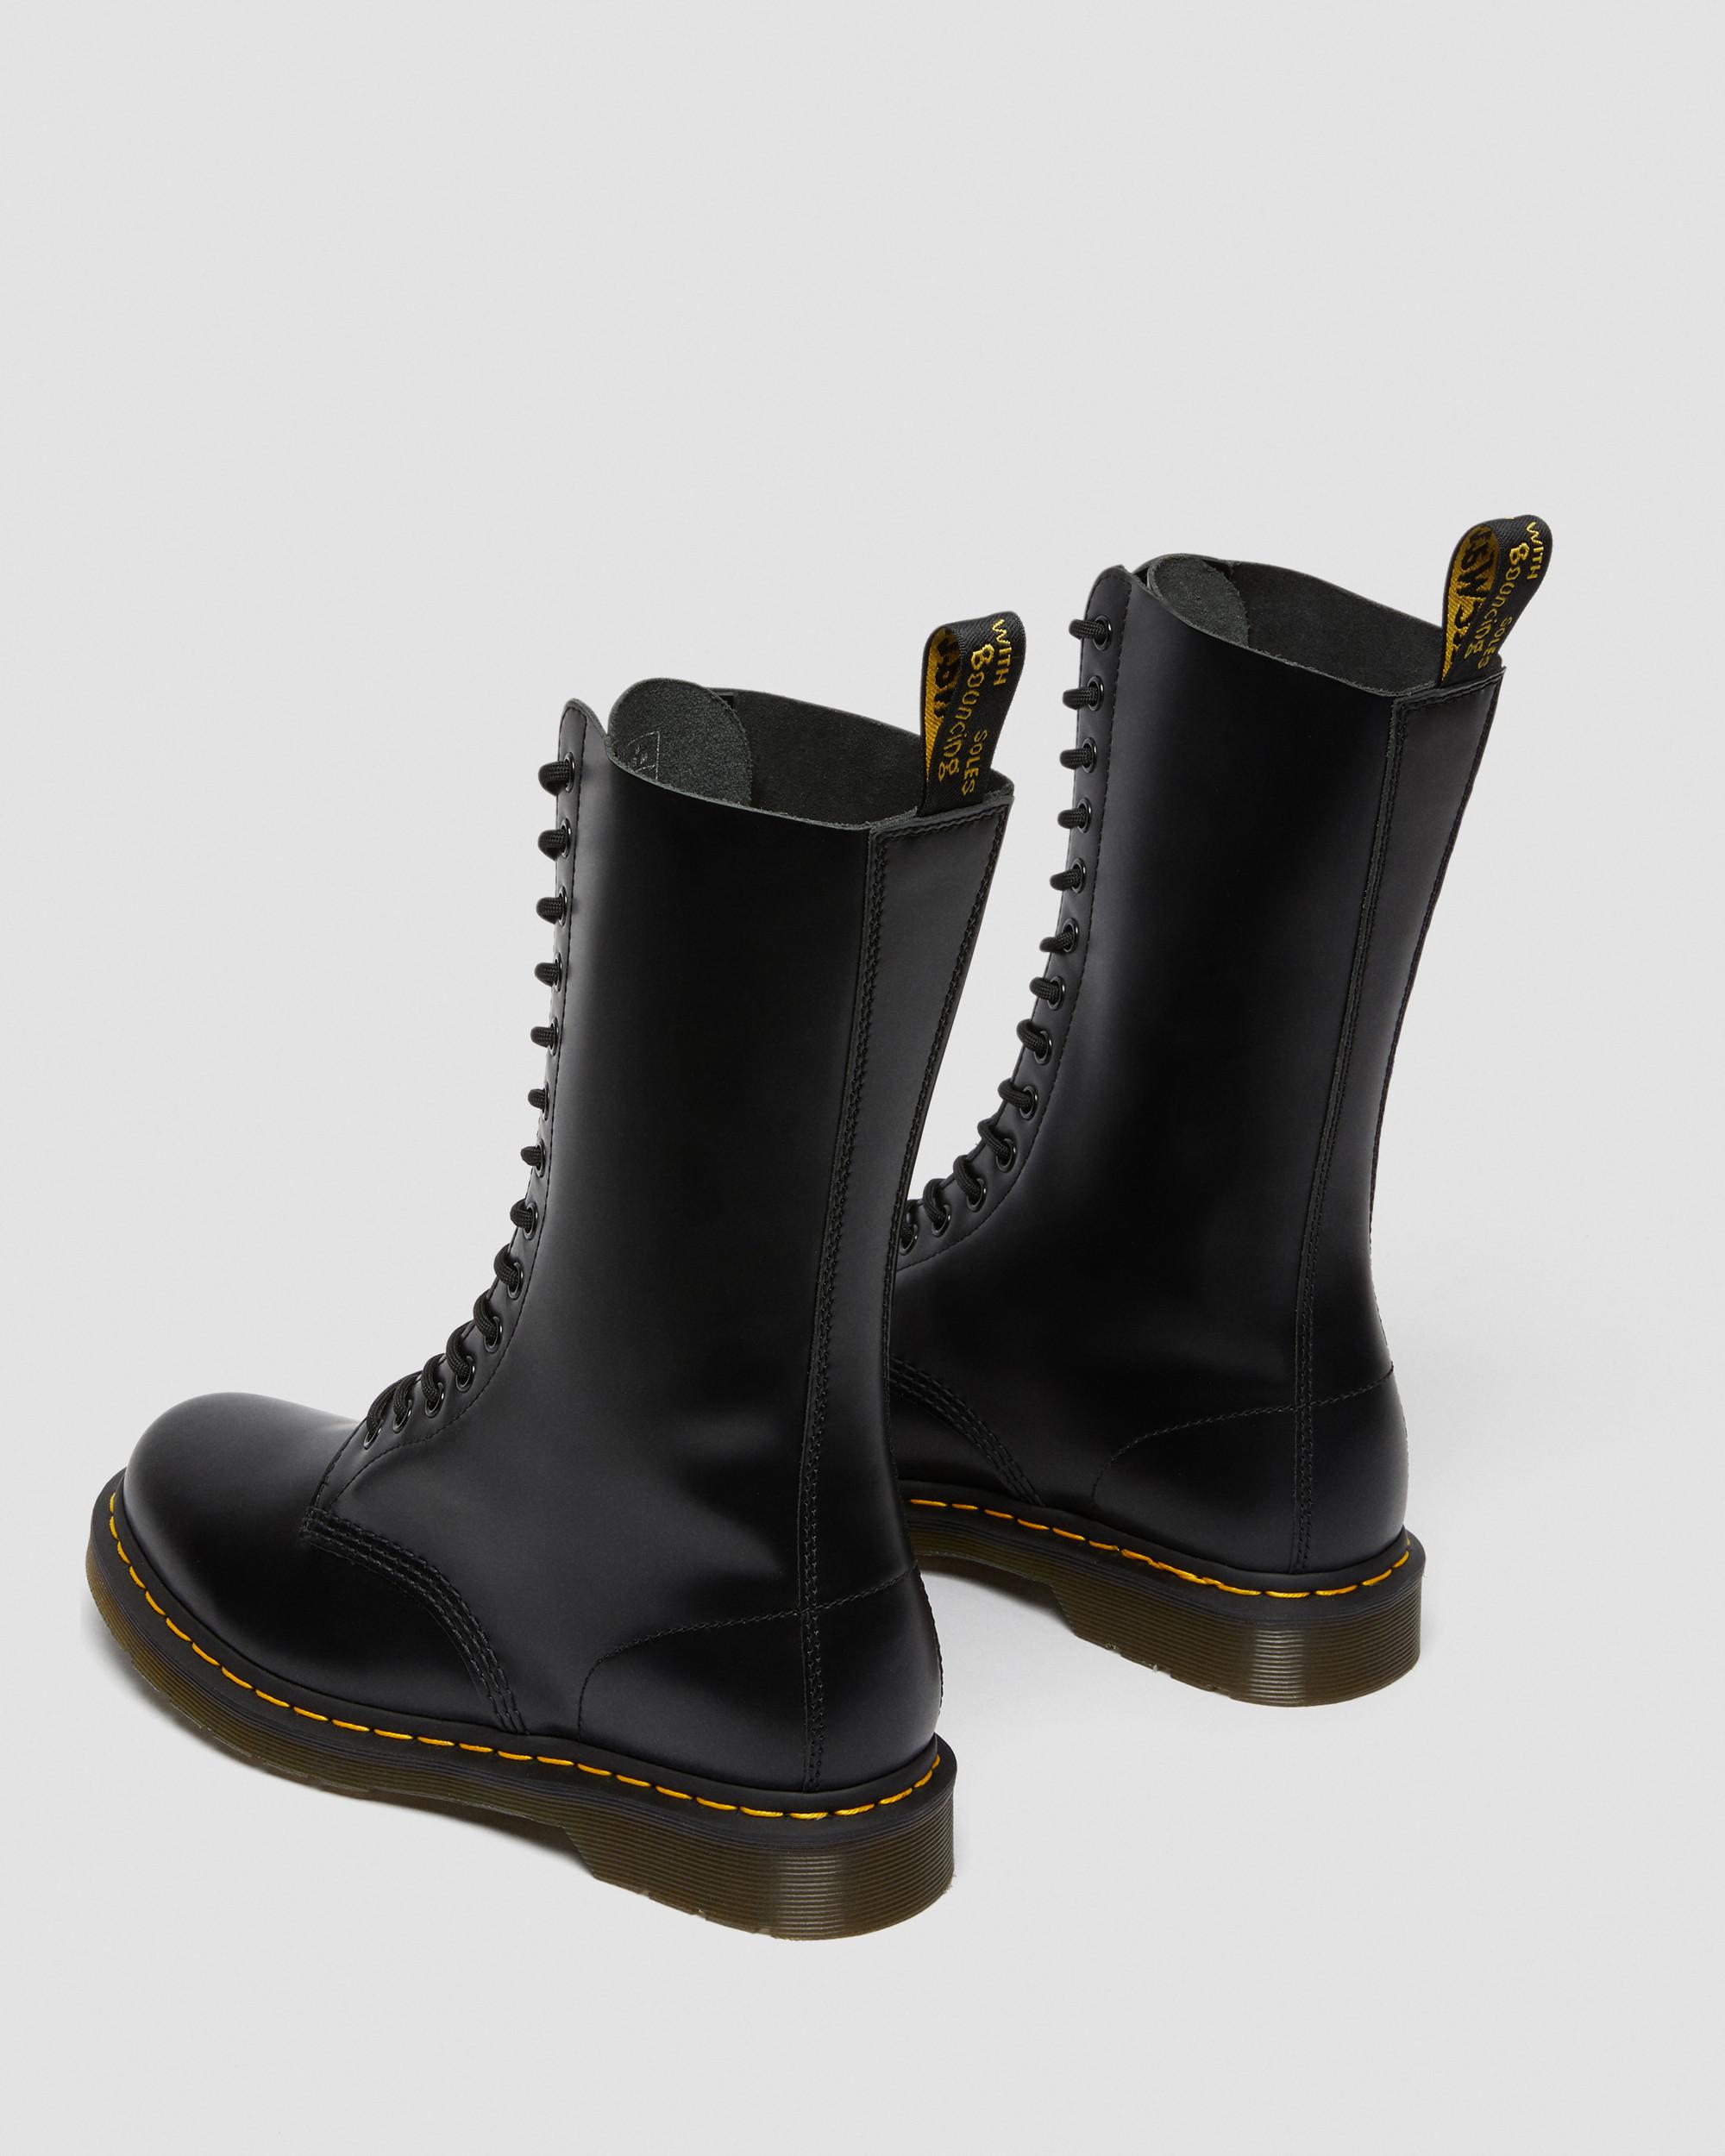 1914 SMOOTH LEATHER HIGH BOOTS | Dr. Martens